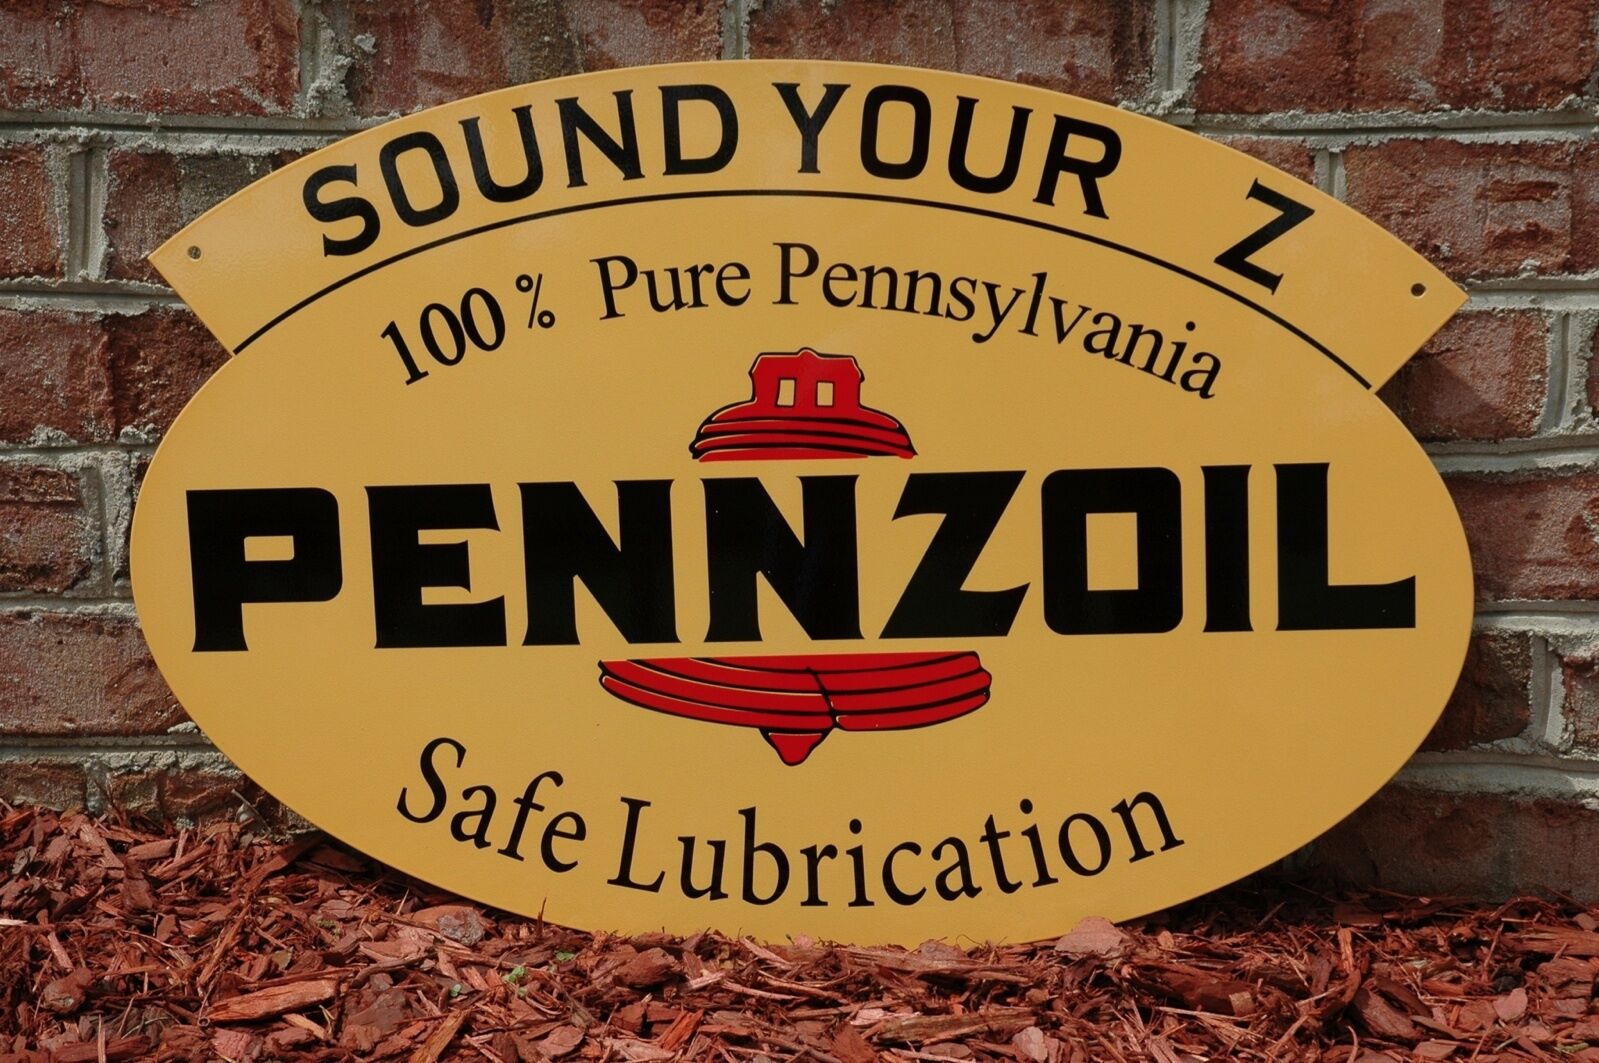 OLD STYLE PENNZOIL "SOUND YOUR Z" MOTOR OIL TWO-SIDED SWINGER SIGN MADE IN USA! Без бренда - фотография #4